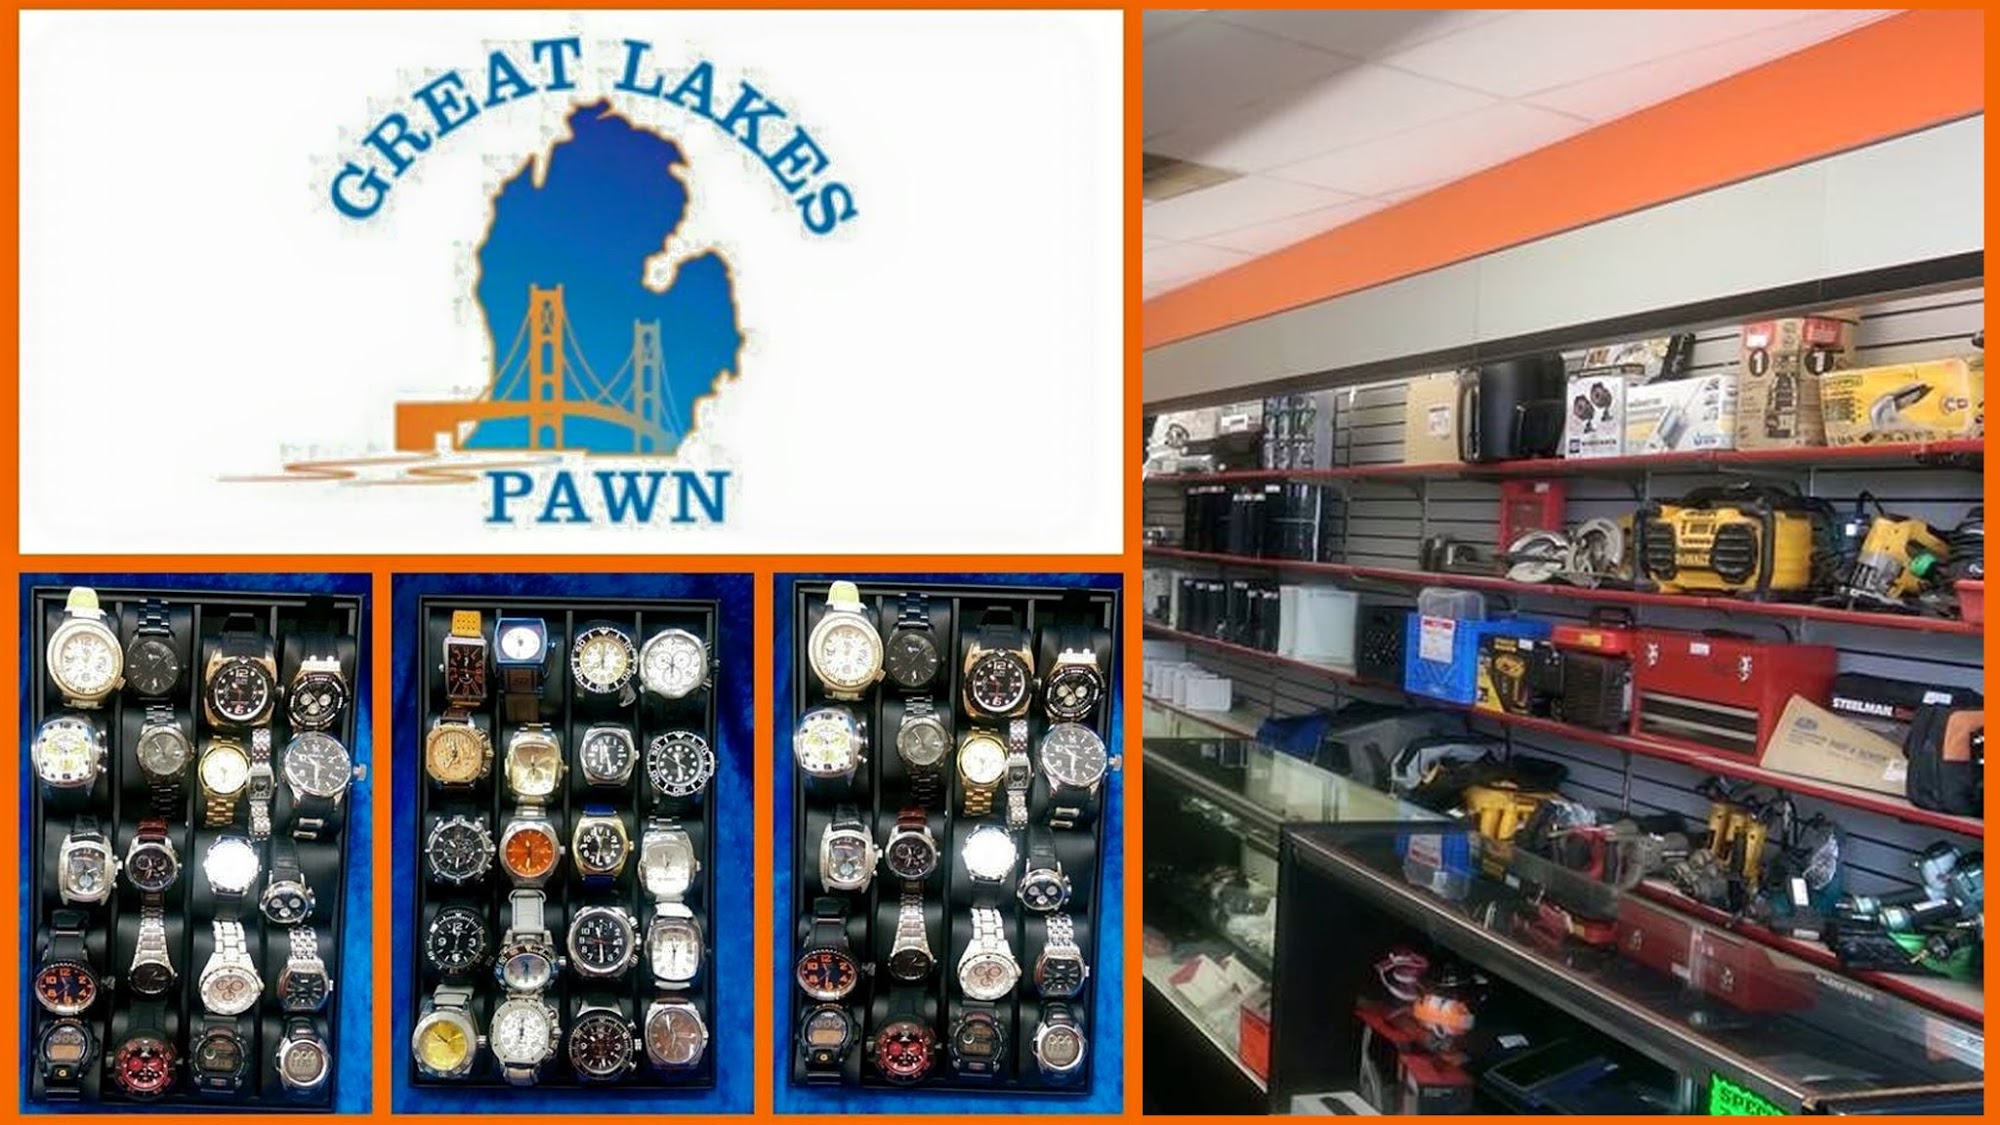 Great Lakes Pawn